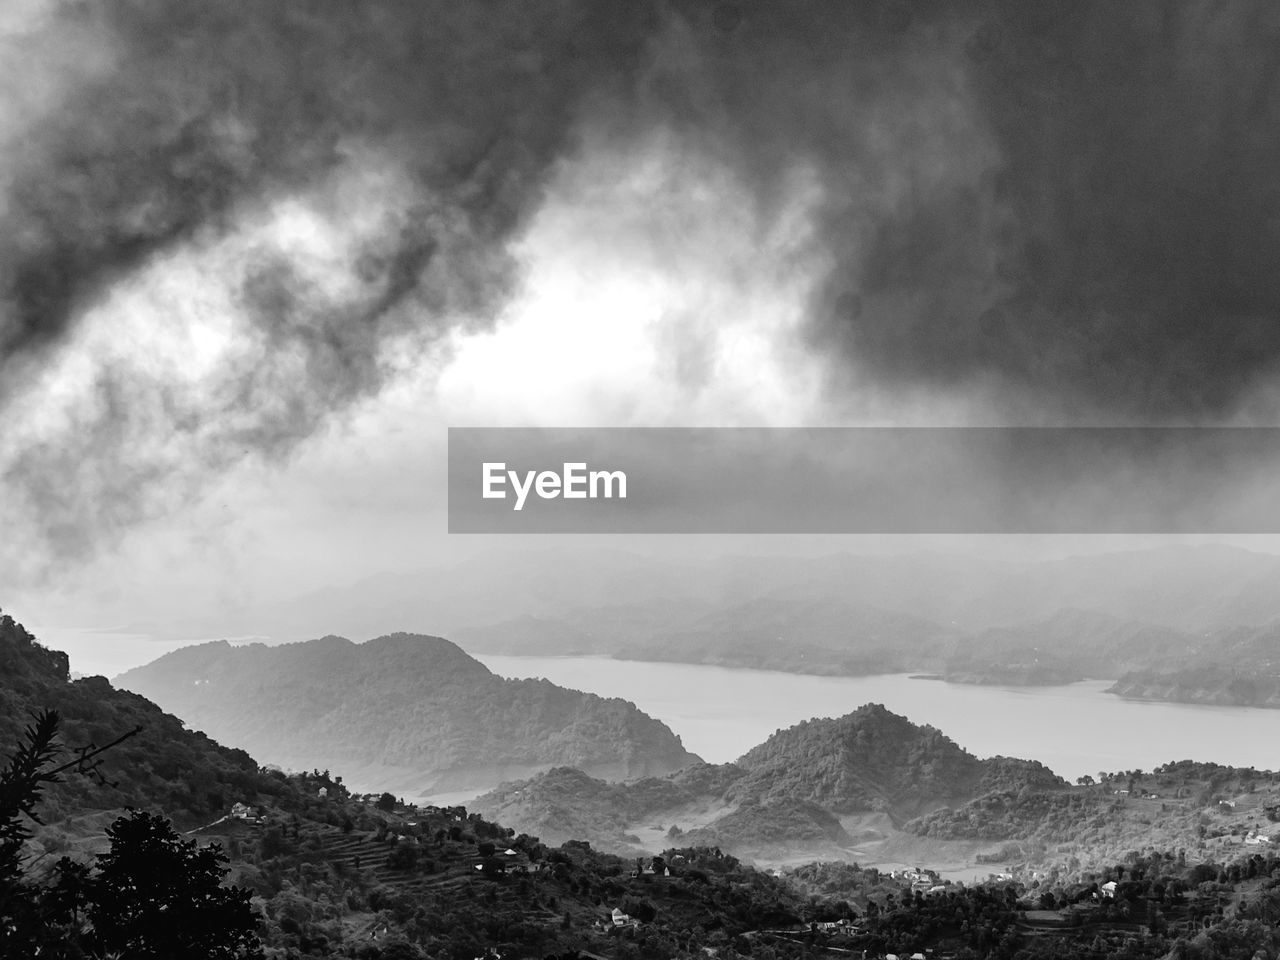 mountain, environment, landscape, black and white, cloud, scenics - nature, sky, beauty in nature, mountain range, monochrome photography, monochrome, nature, fog, land, no people, travel, travel destinations, dramatic sky, outdoors, tranquility, tree, forest, darkness, storm, mountain peak, cloudscape, overcast, non-urban scene, tranquil scene, tourism, plant, dramatic landscape, valley, awe